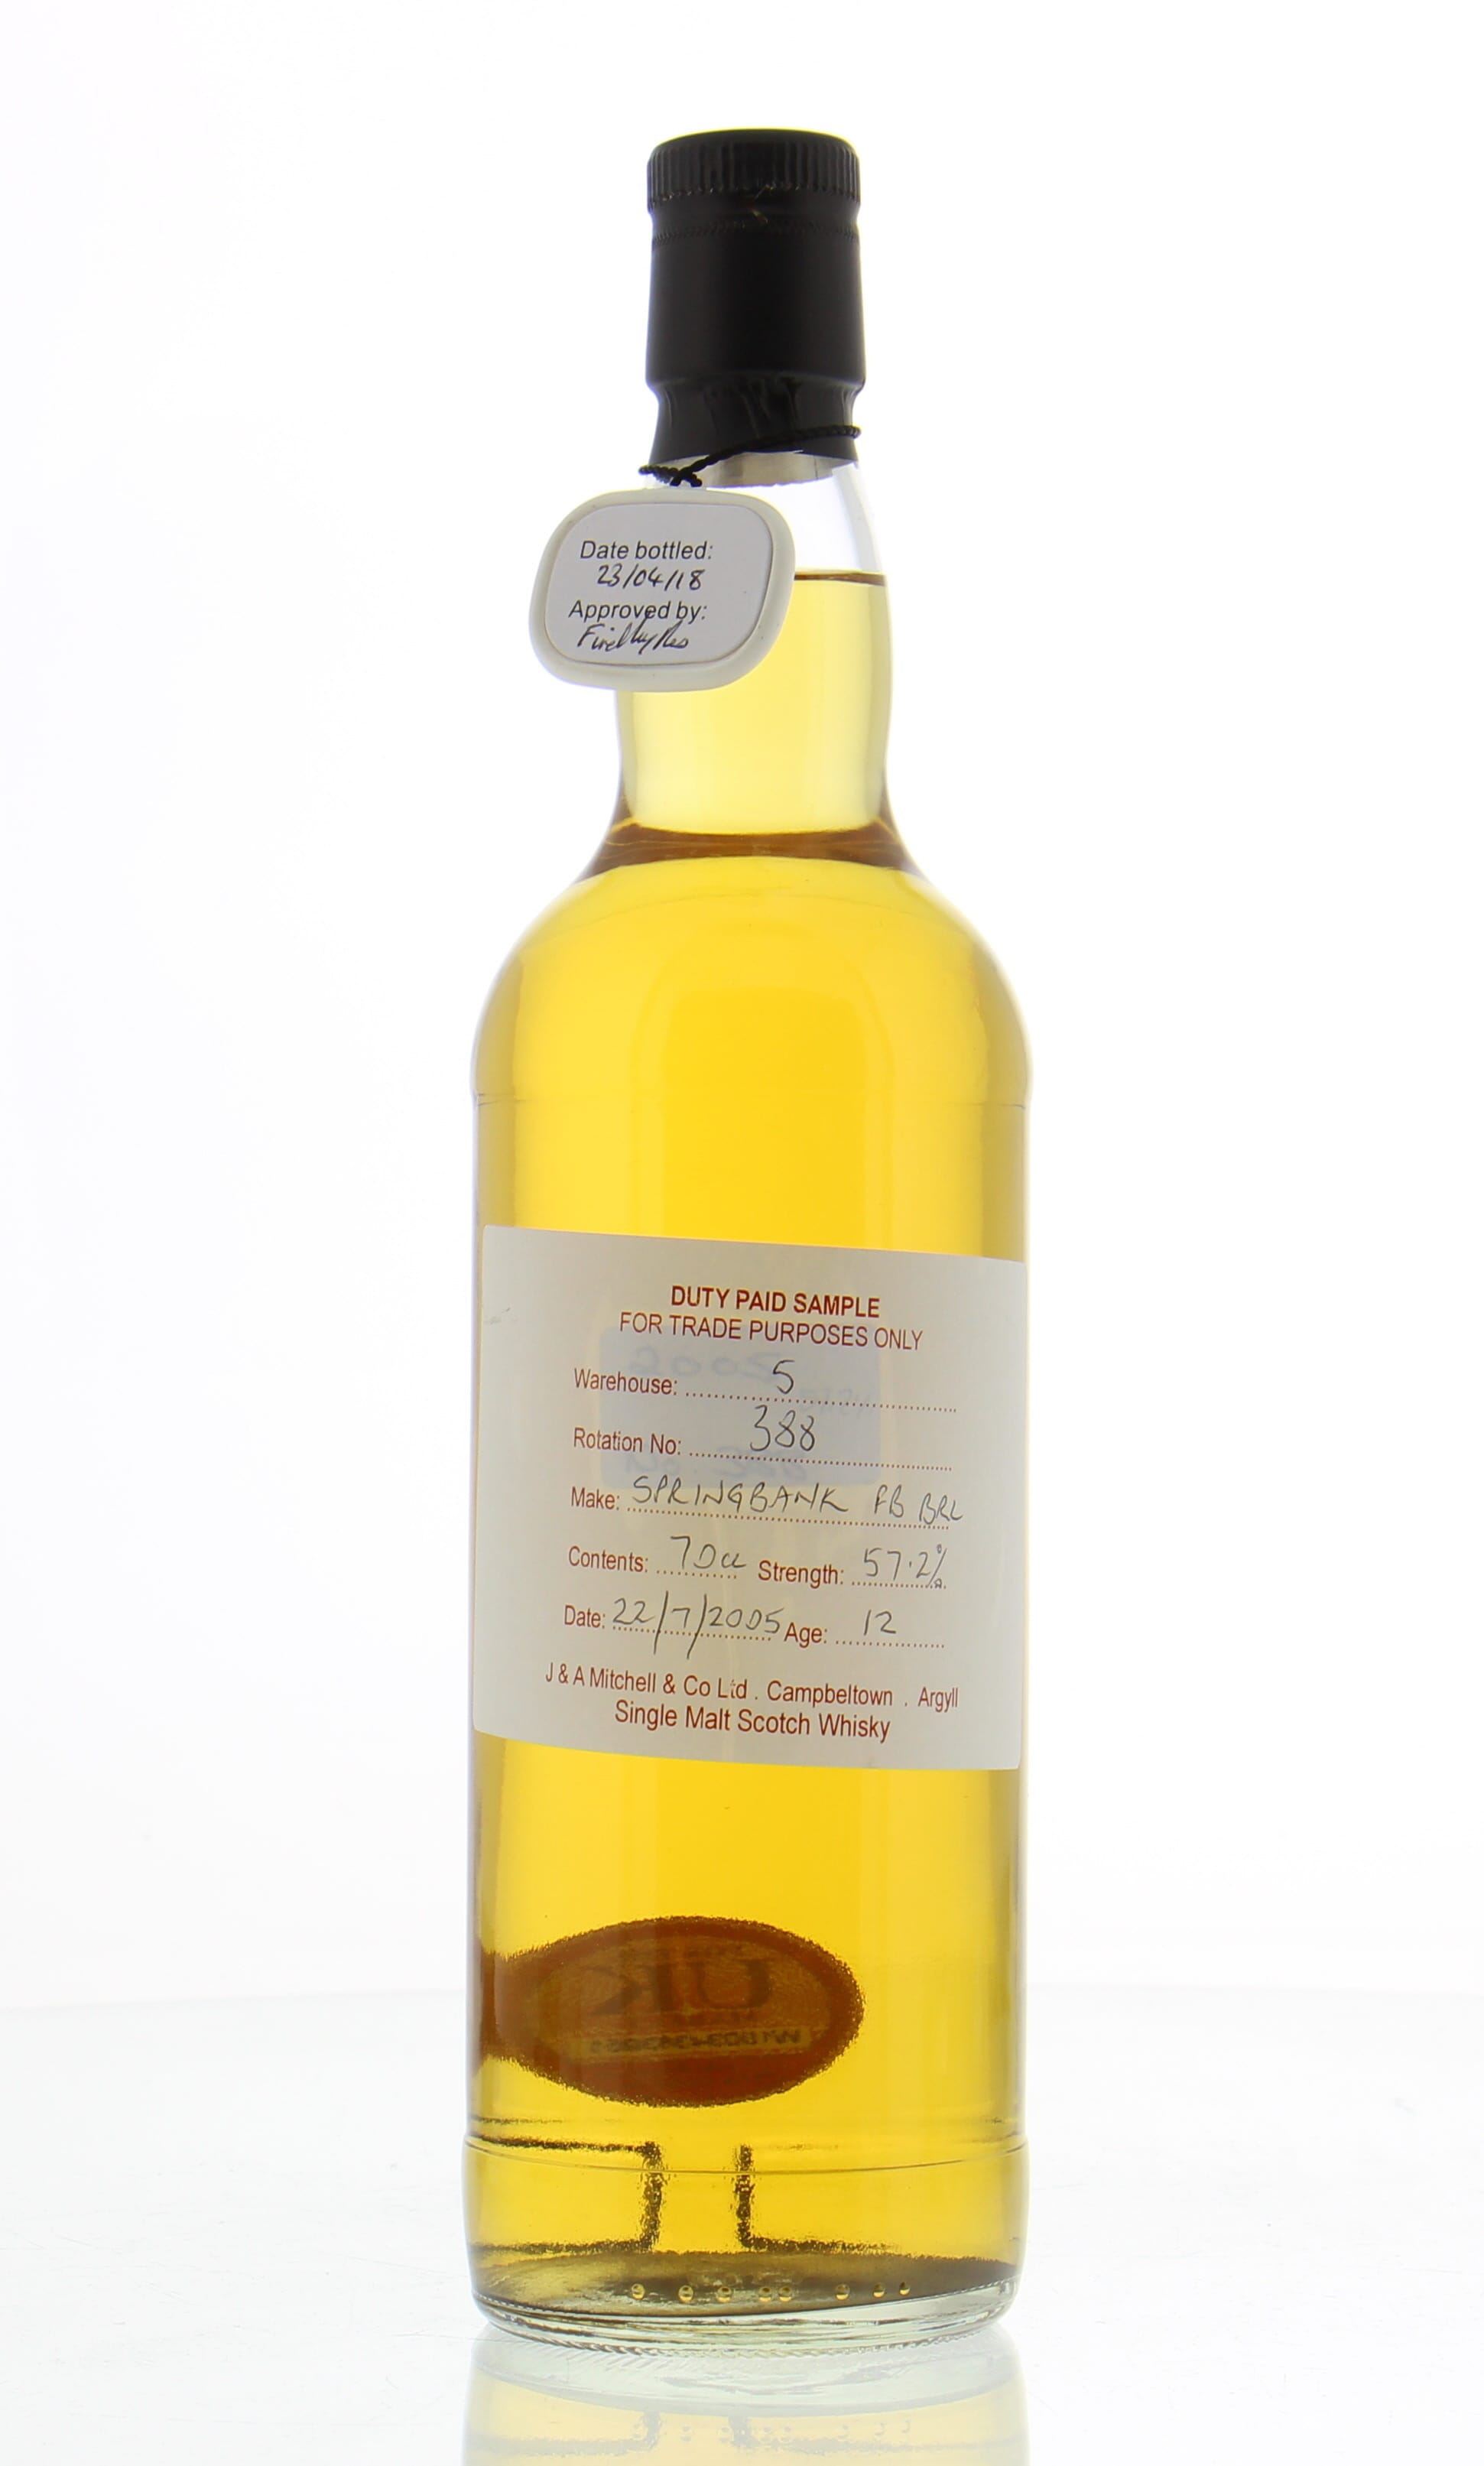 Springbank - 12 Years Old Duty Paid Sample Warehouse 5 Rotation 388 57.2% 2005 Perfect